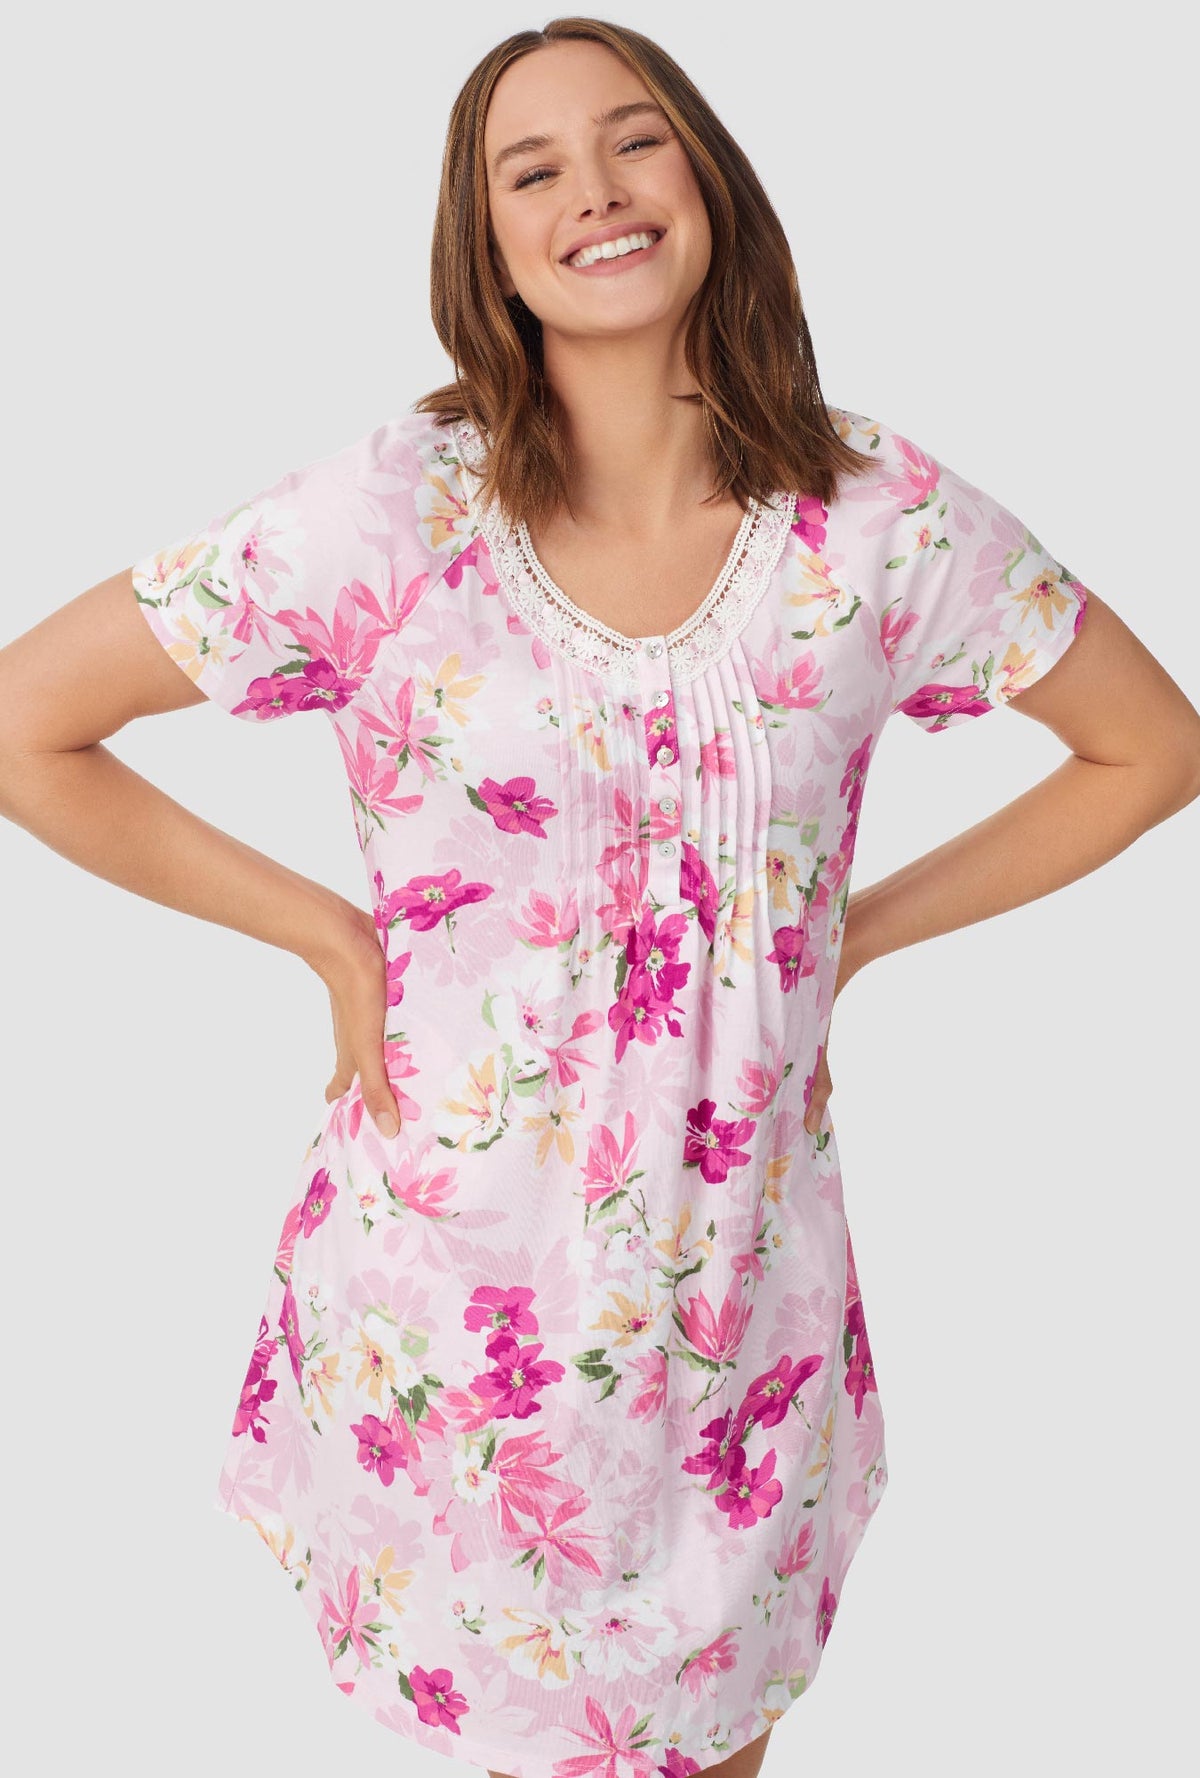 White and Magenta Floral Short Sleeve Nightshirt